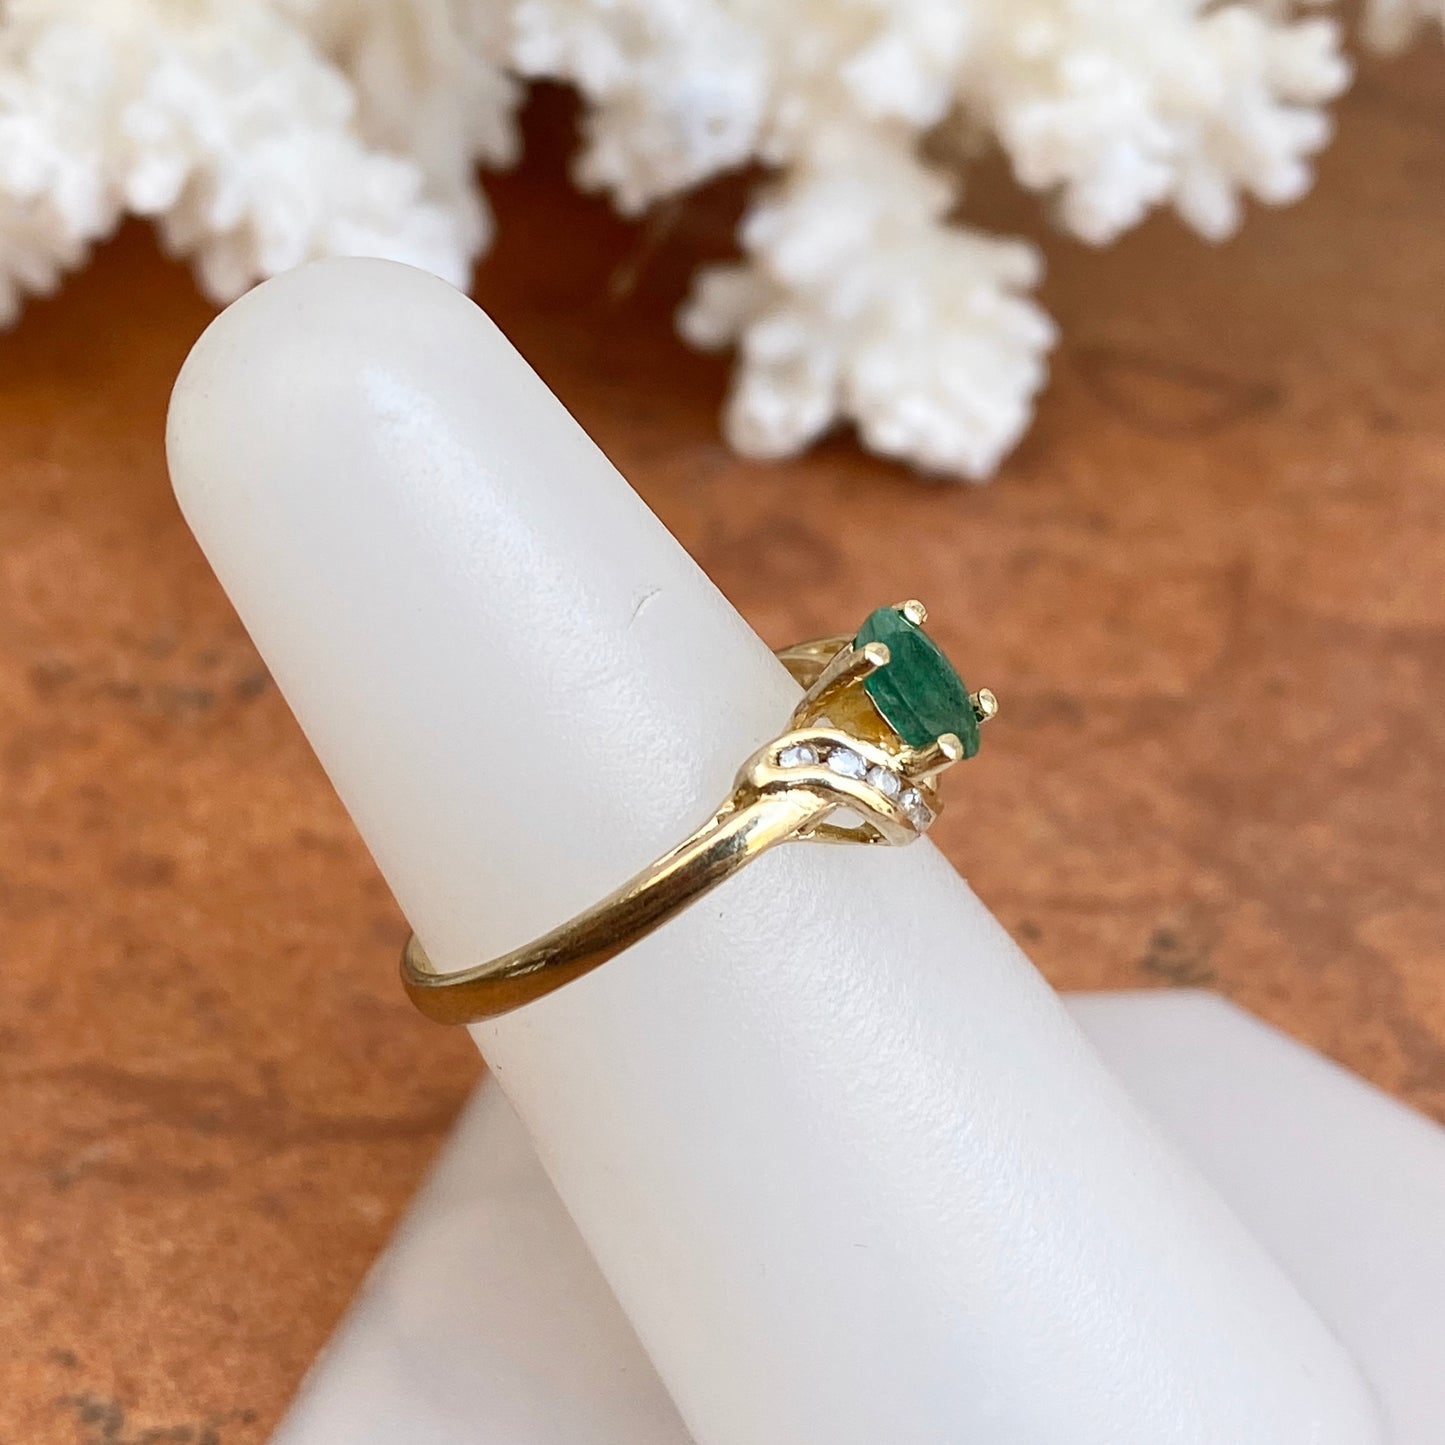 Estate 14KT Yellow Gold Oval .70 CT Emerald + Diamond Accent Ring